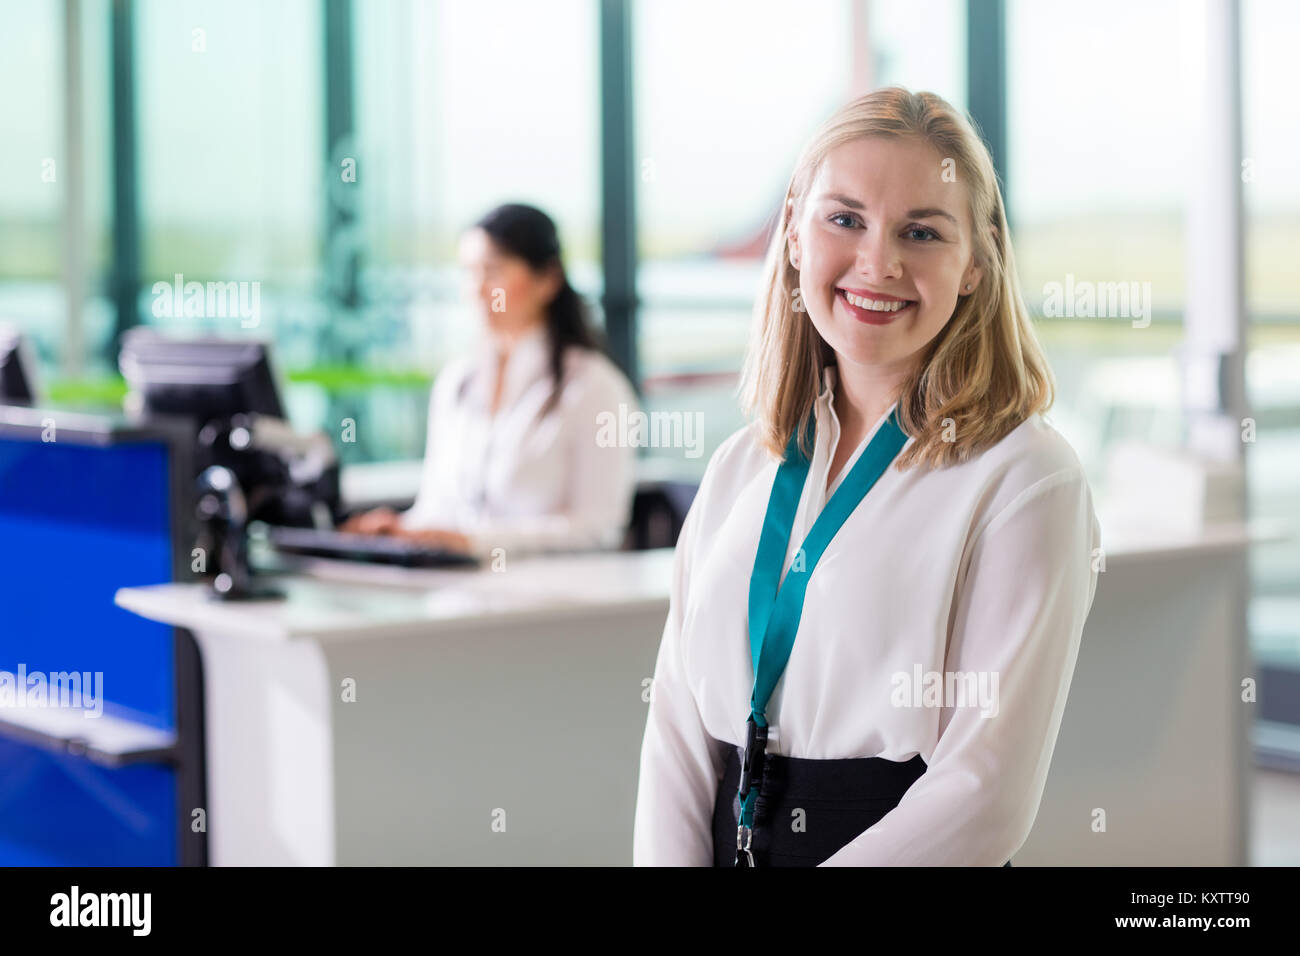 Portrait of young ground staff smiling while colleague working at reception in airport Stock Photo